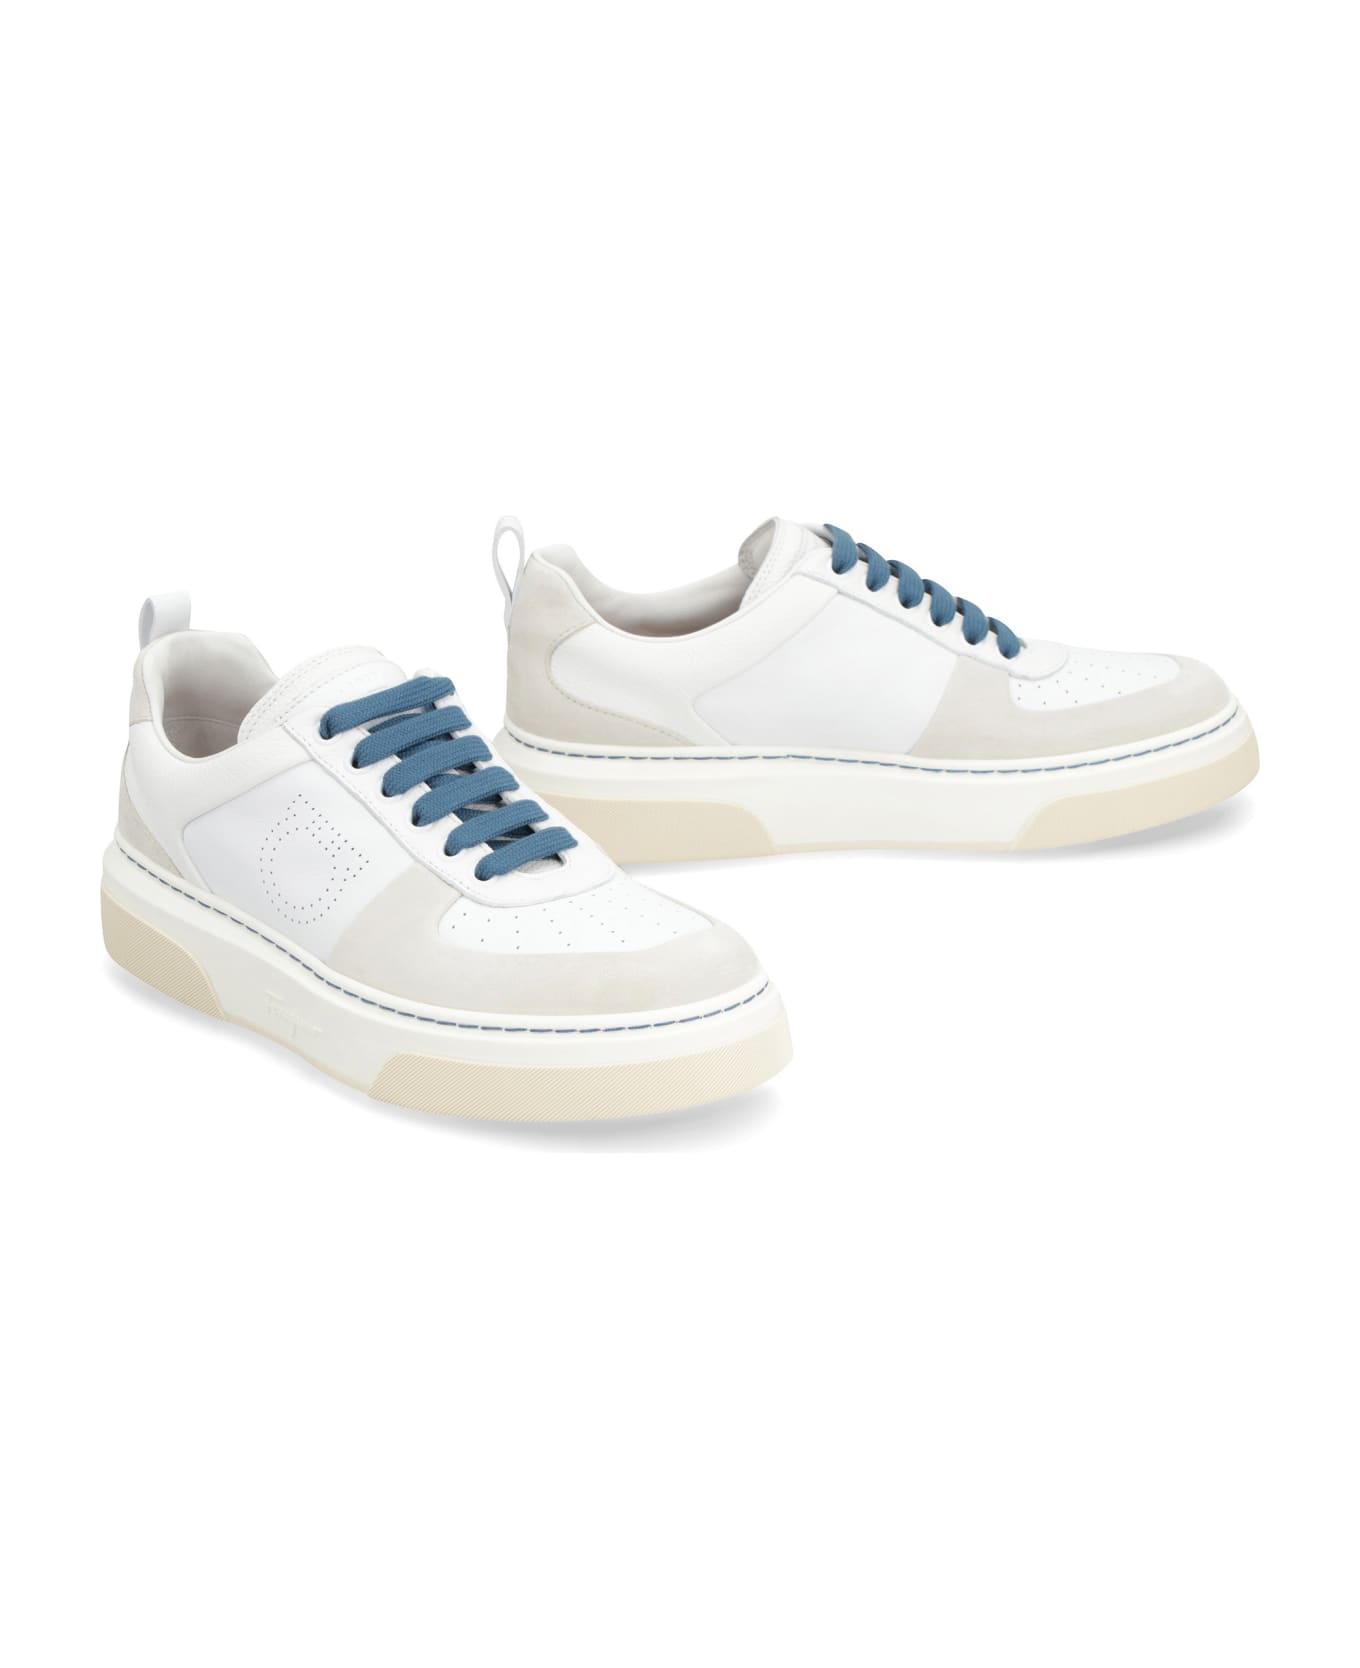 Ferragamo Leather Low-top Sneakers - White スニーカー